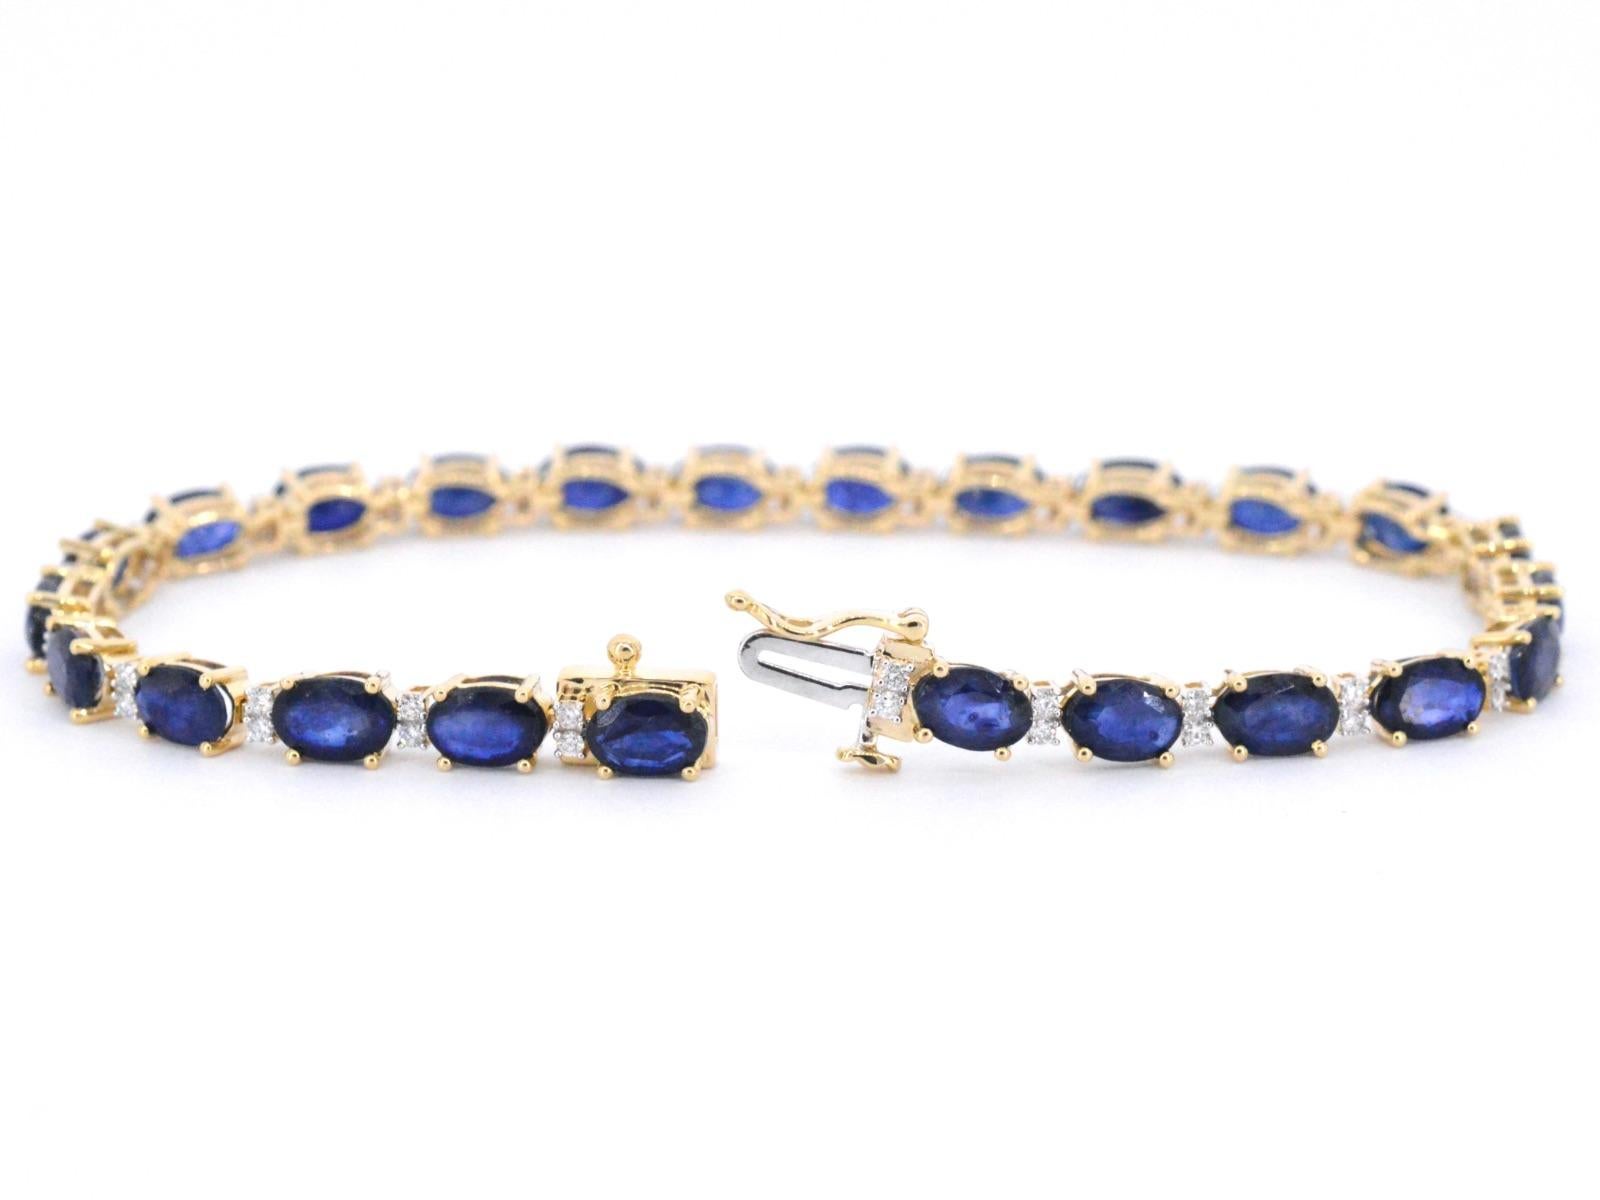 Brilliant Cut Gold Tennis Bracelet with Diamonds and Sapphire For Sale